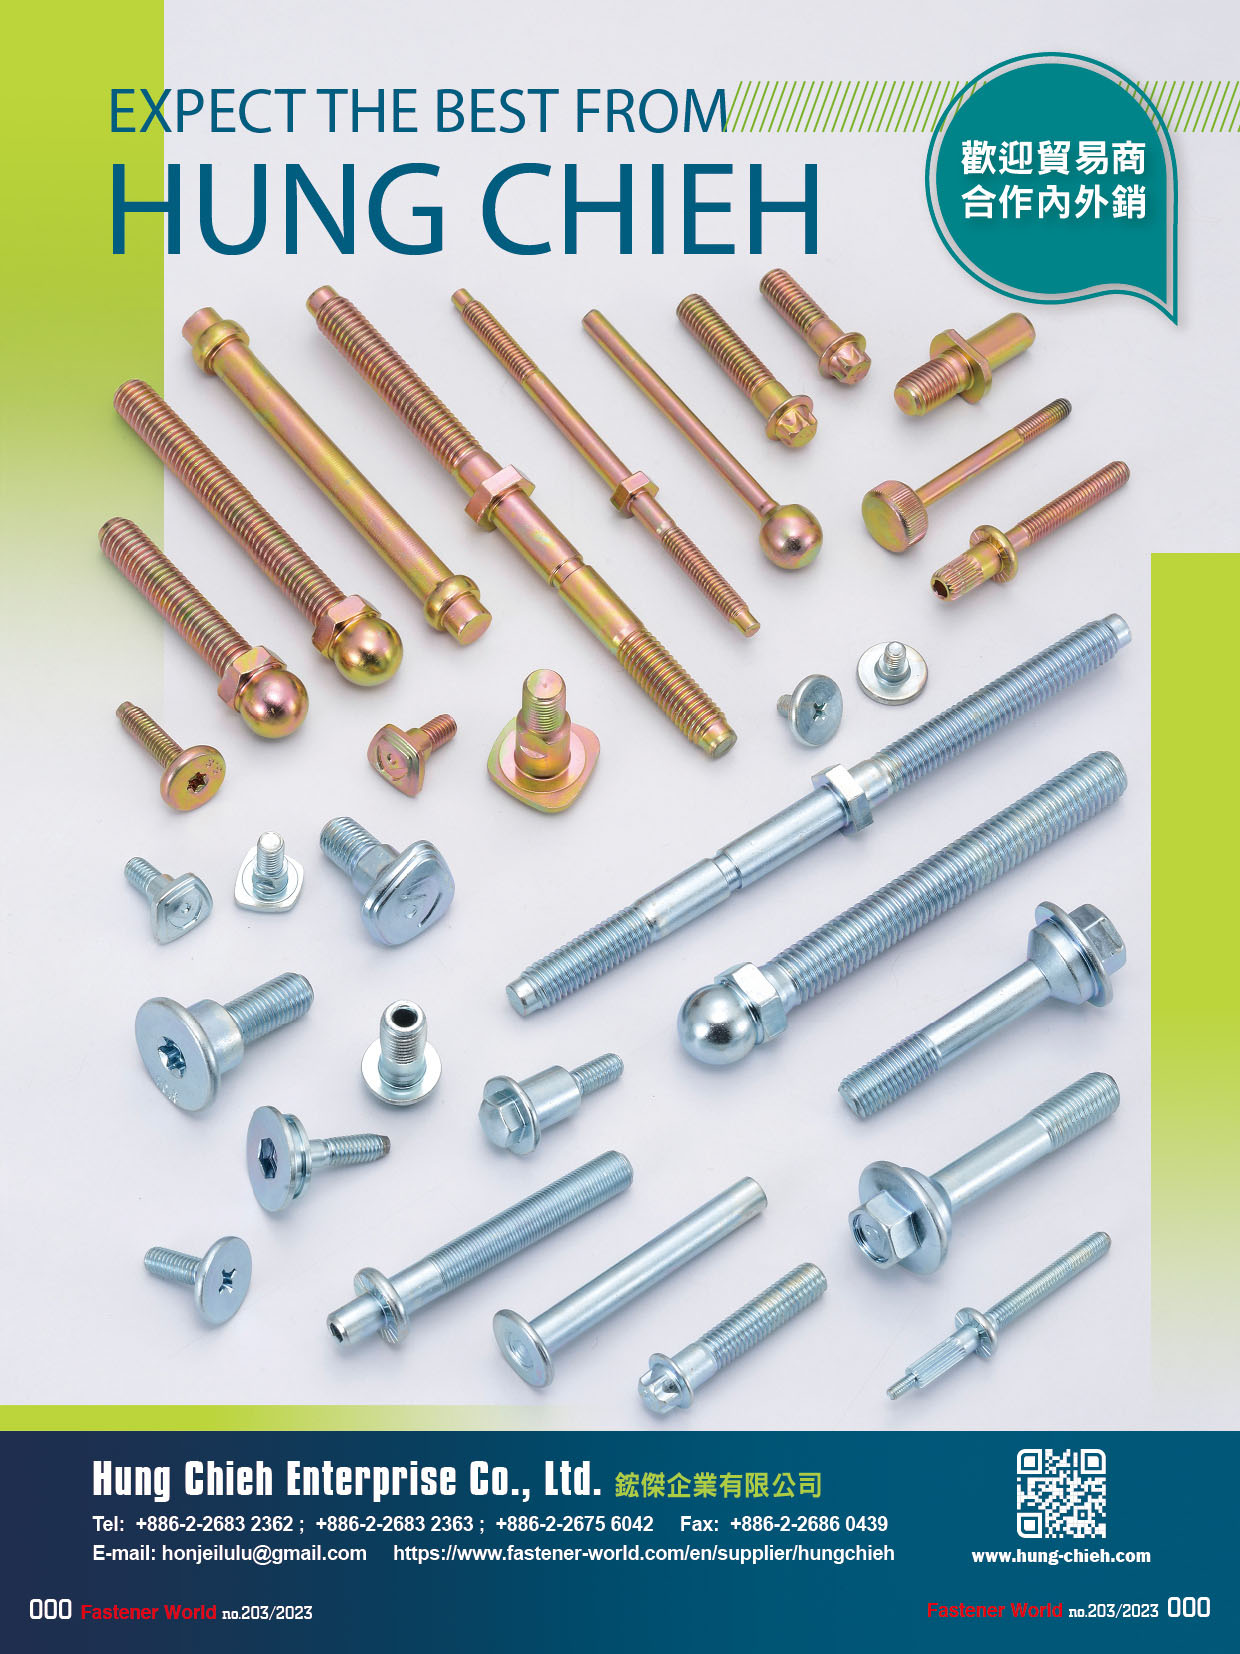 HUNG CHIEH ENTERPRISE CO., LTD. , Automotive & Motorcycle Screws, Special Screws,  Cold Forged Parts and  Customized Parts